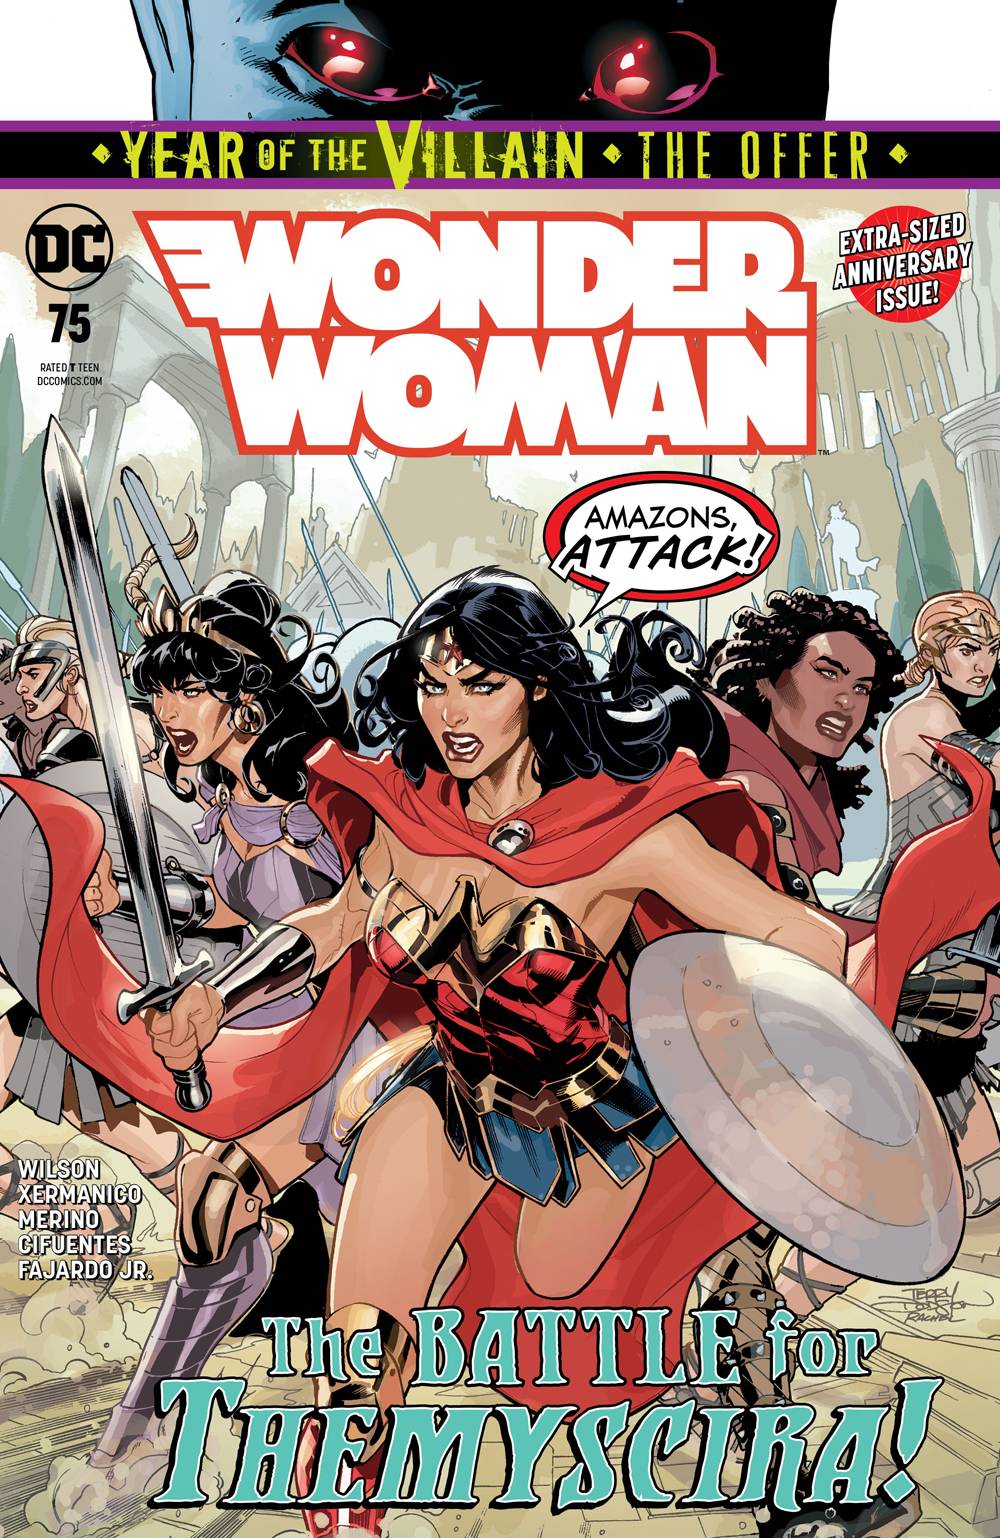 WONDER WOMAN #75 YOTV THE OFFER | Game Master's Emporium (The New GME)